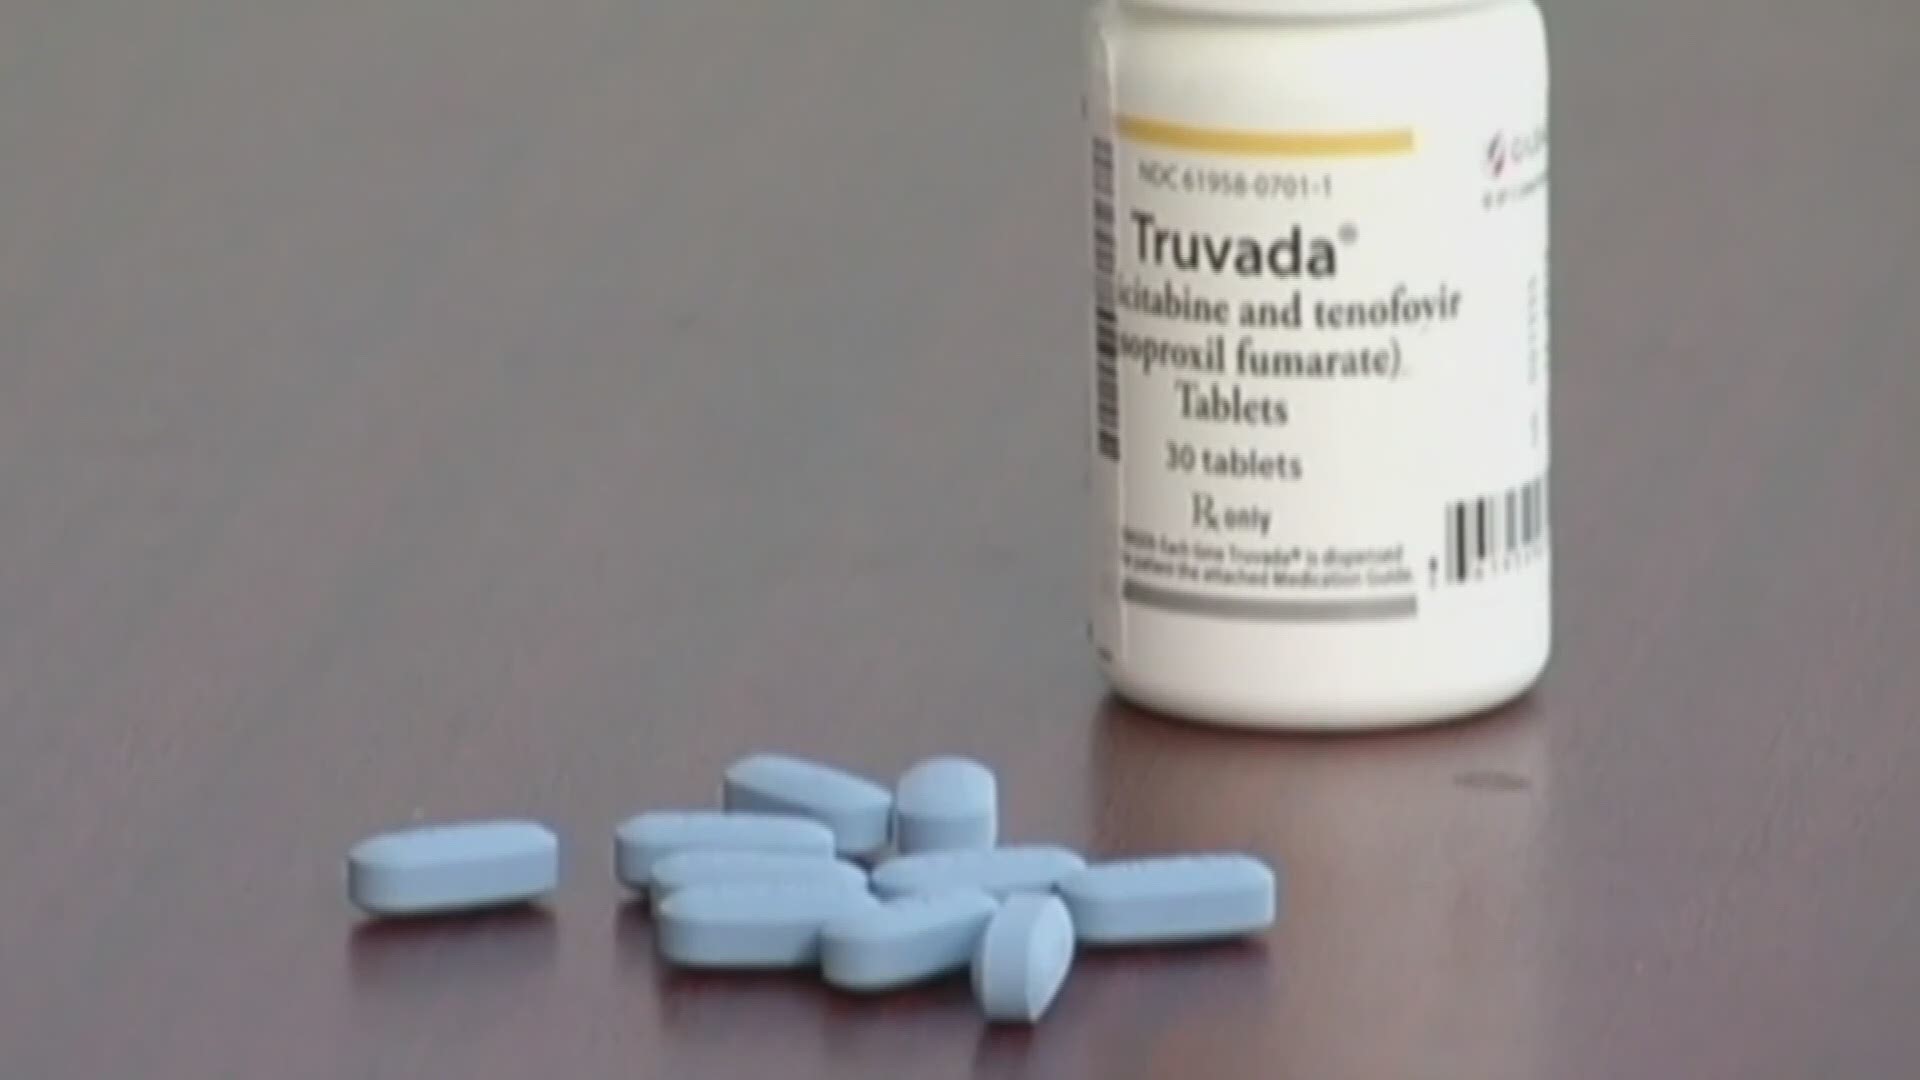 Sydney, Australia man says he contracted the disease while on the medication, however experts say PrEP is highly effective.